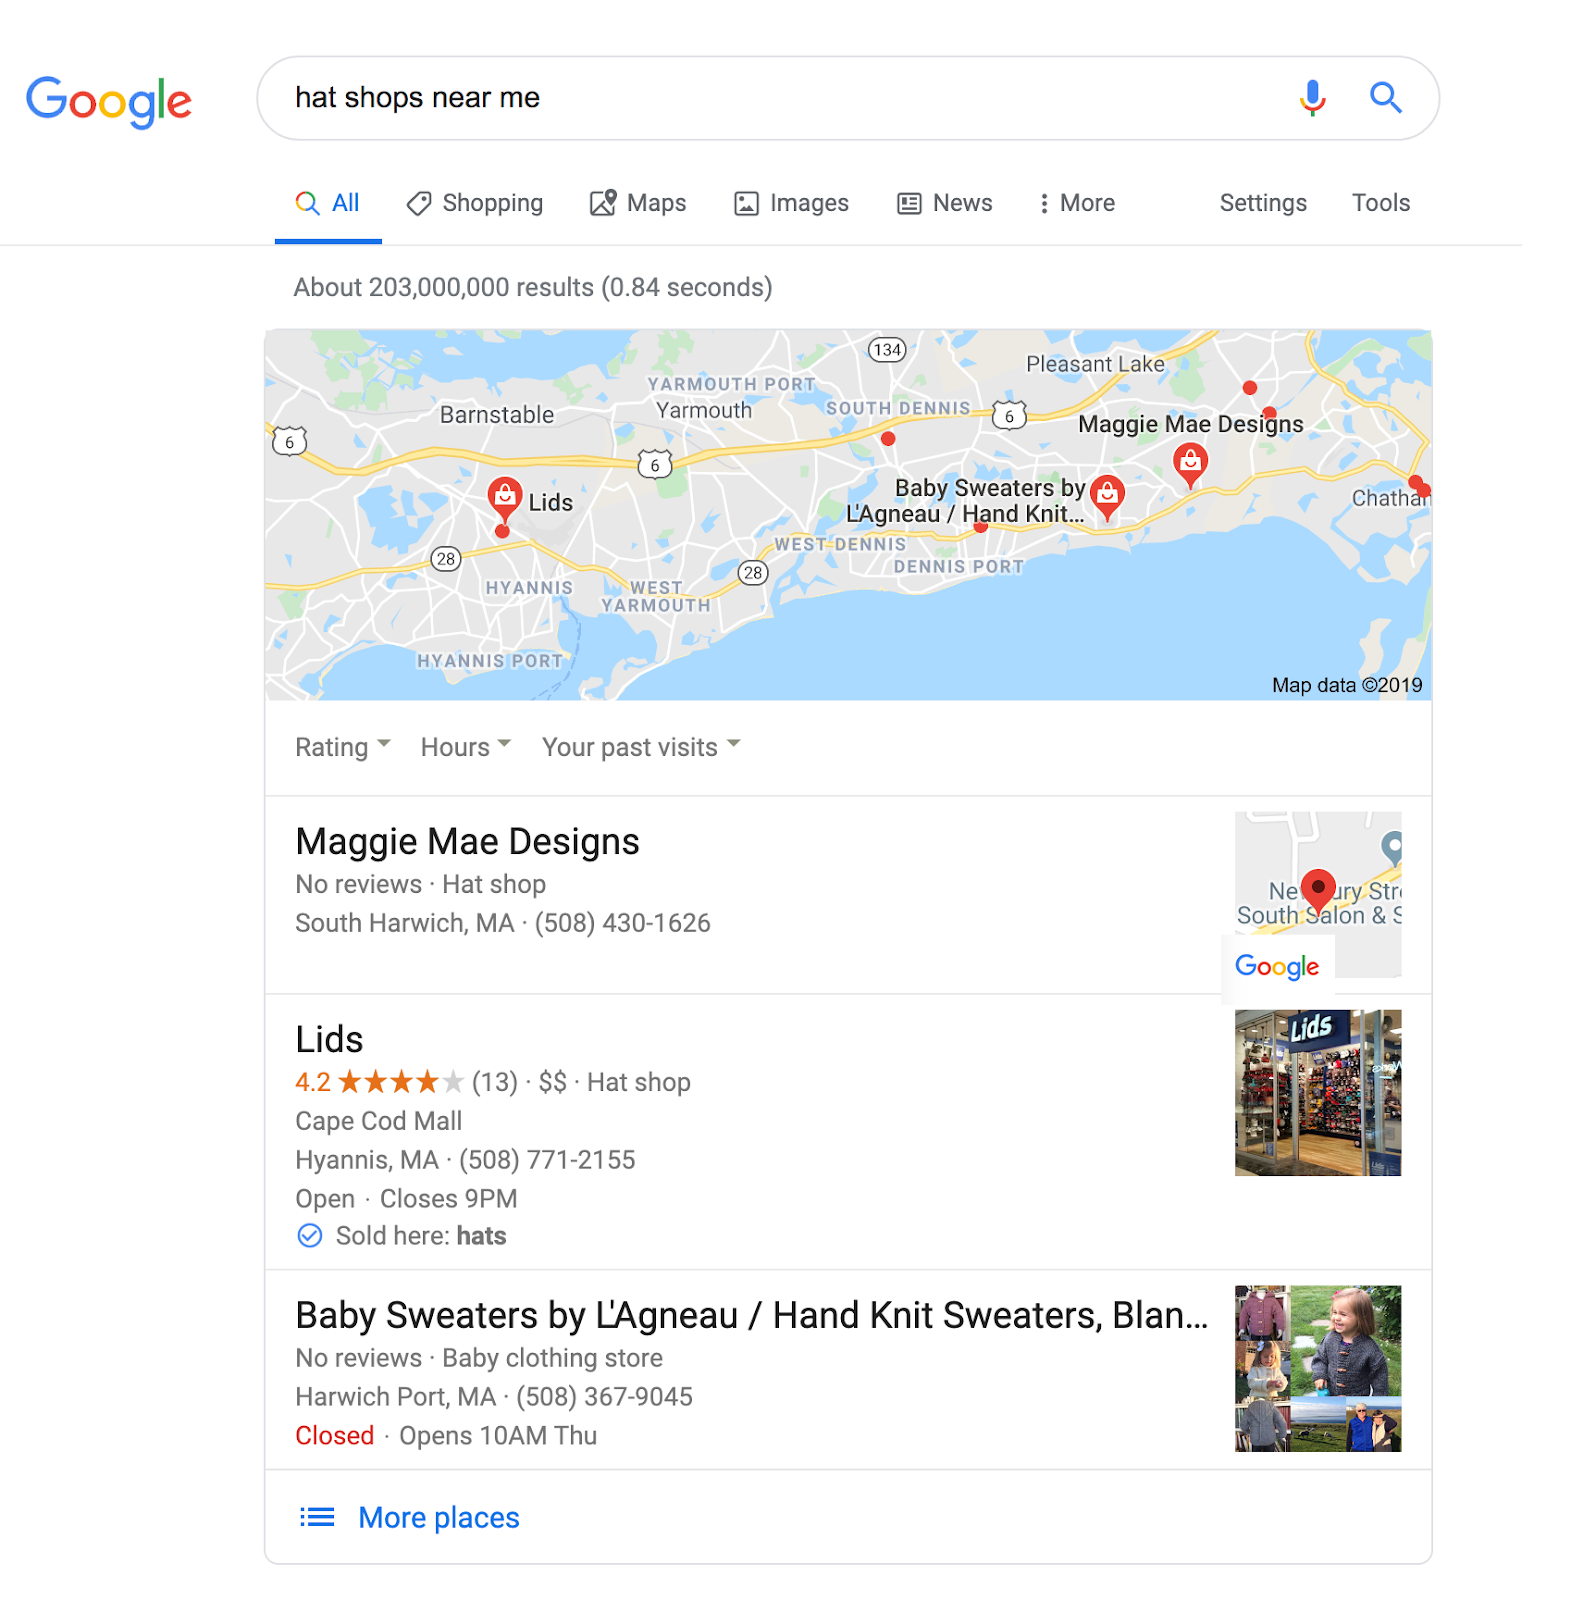 Google search results page